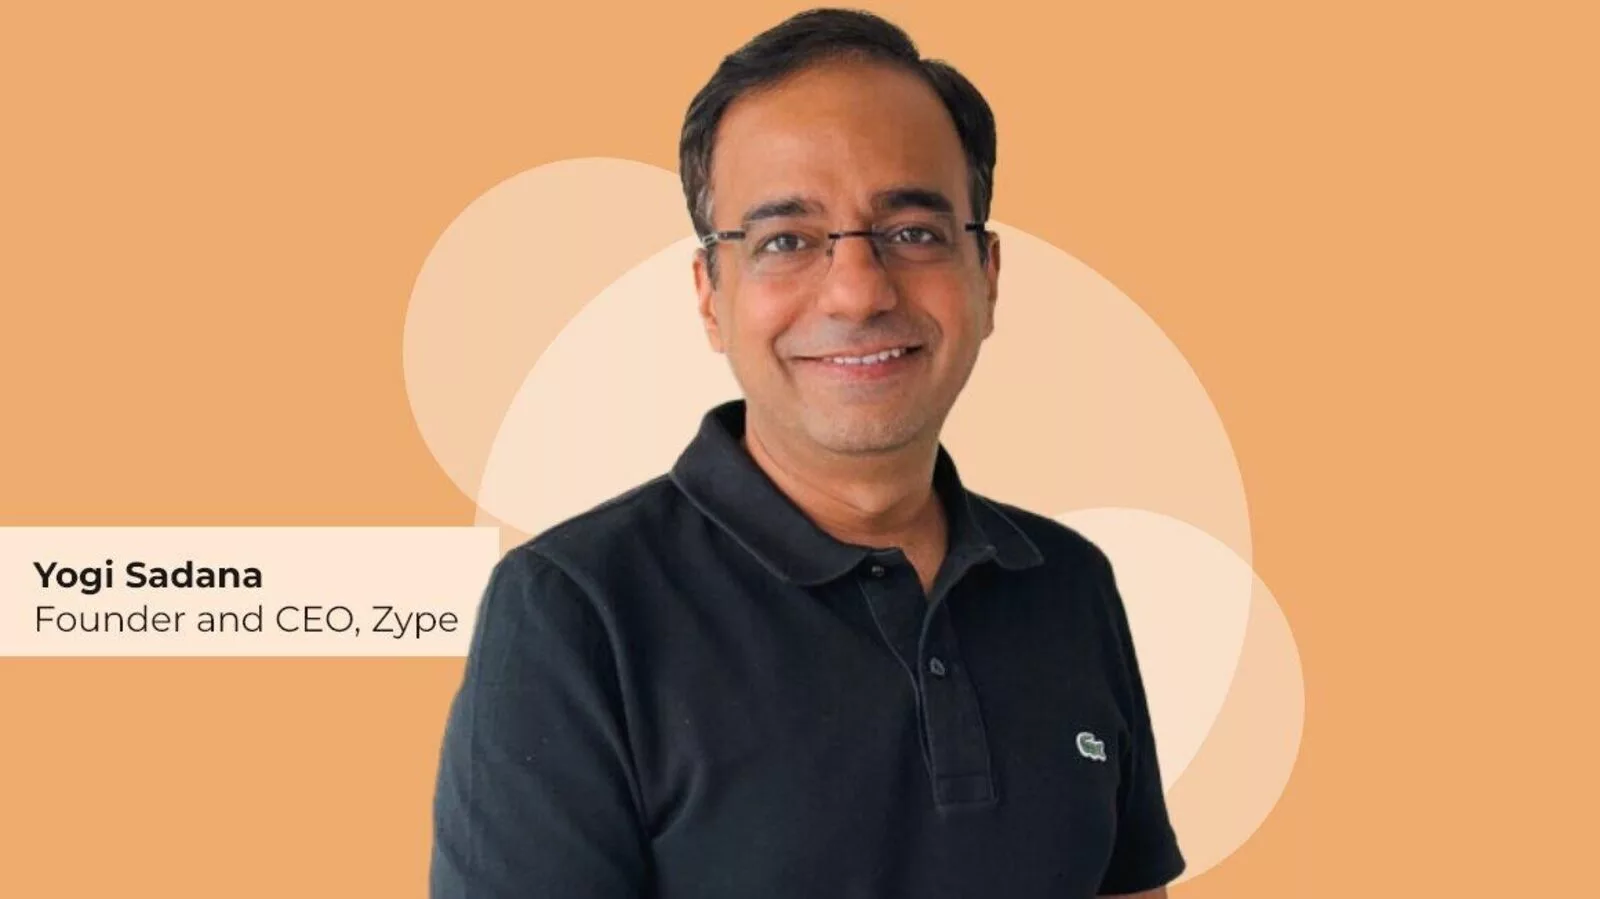 Building a better credit history can lead to better credit products and terms in the future, says Yogi Sadana of Zype